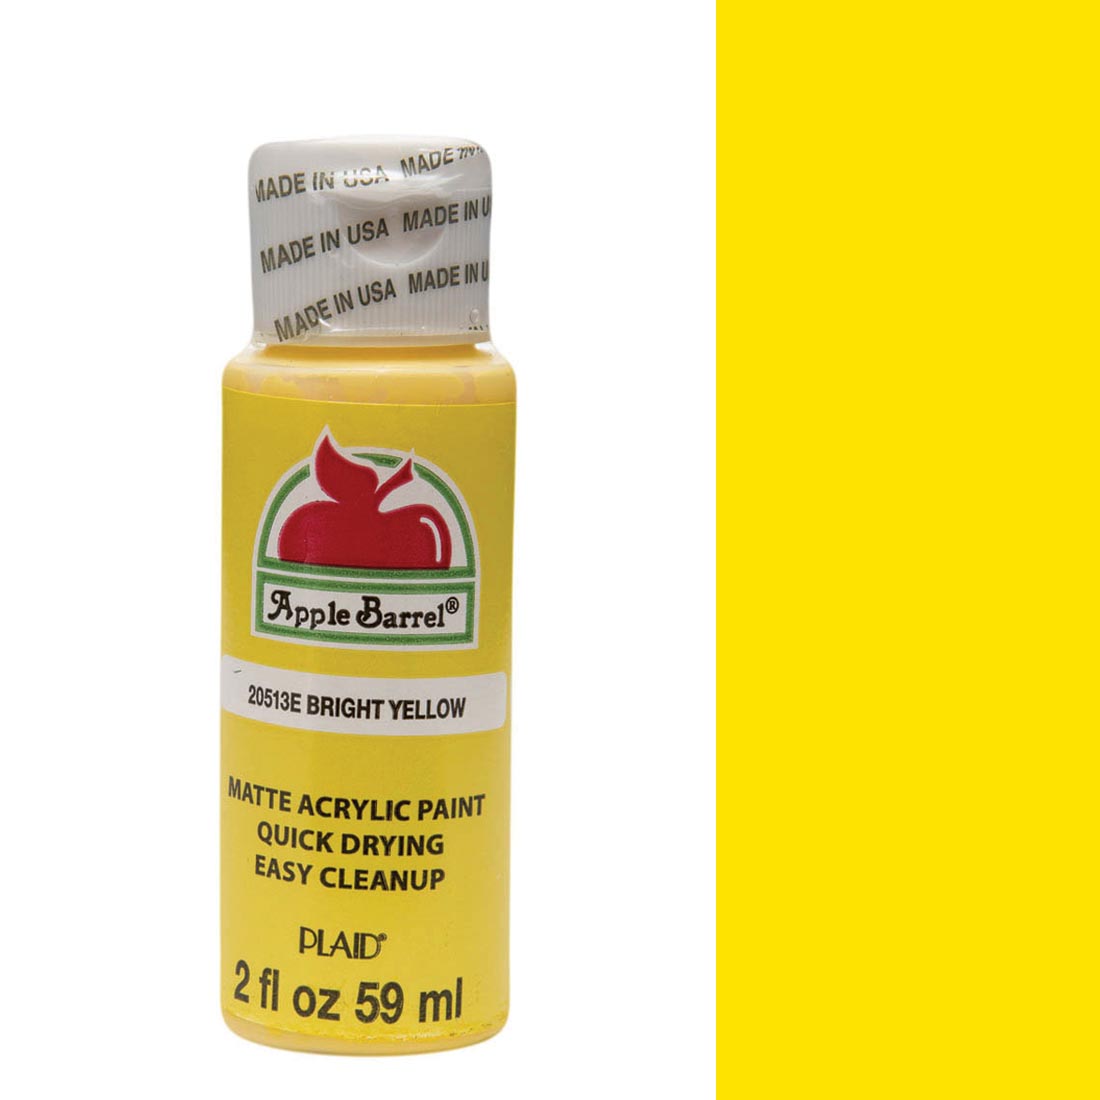 Bright Yellow Apple Barrel Acrylic Craft Paint bottle next to its color swatch